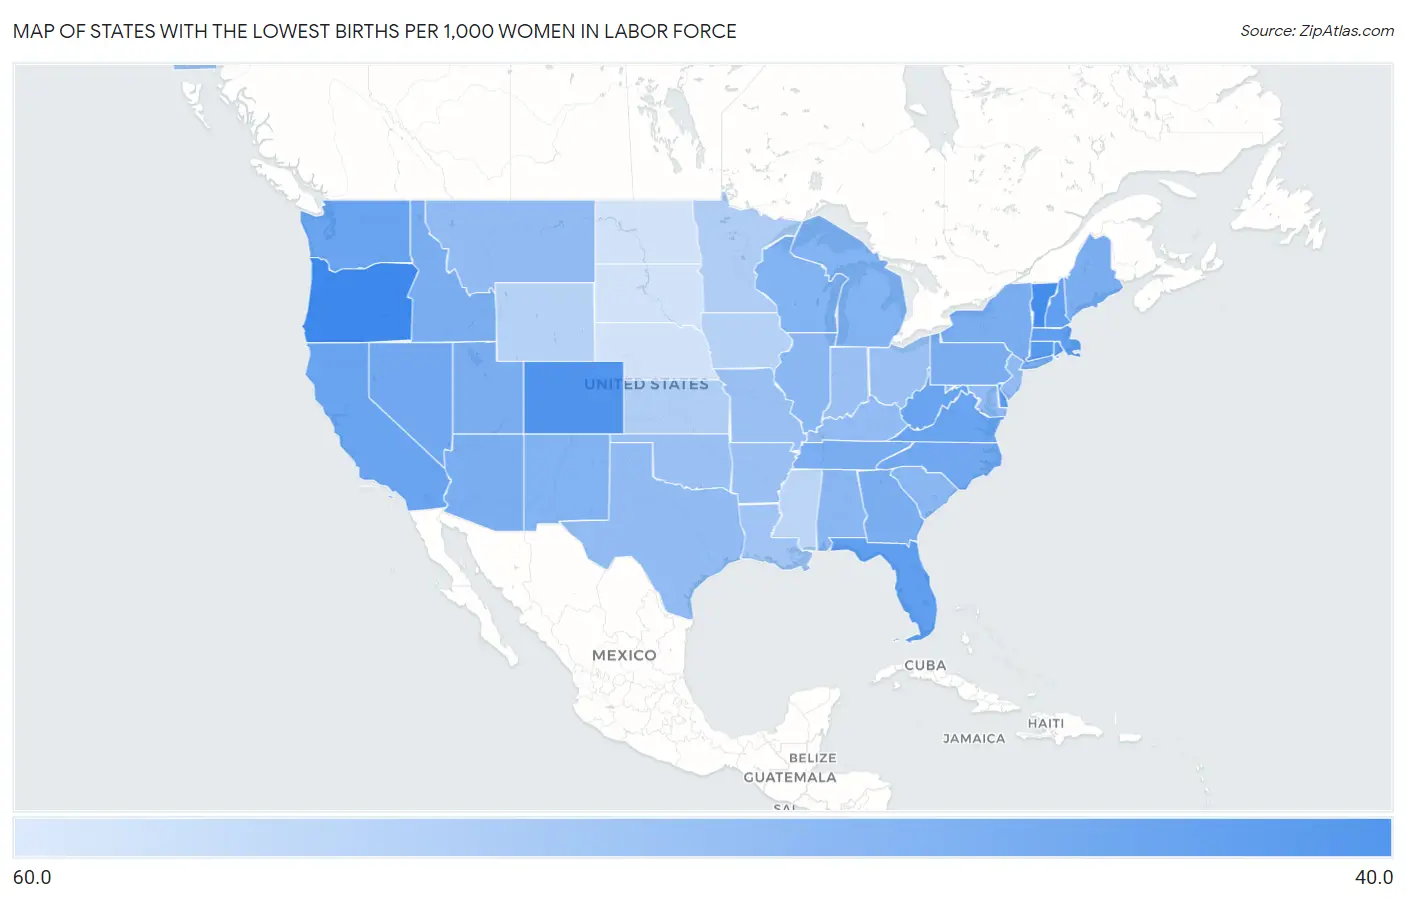 States with the Lowest Births per 1,000 Women in Labor Force in the United States Map